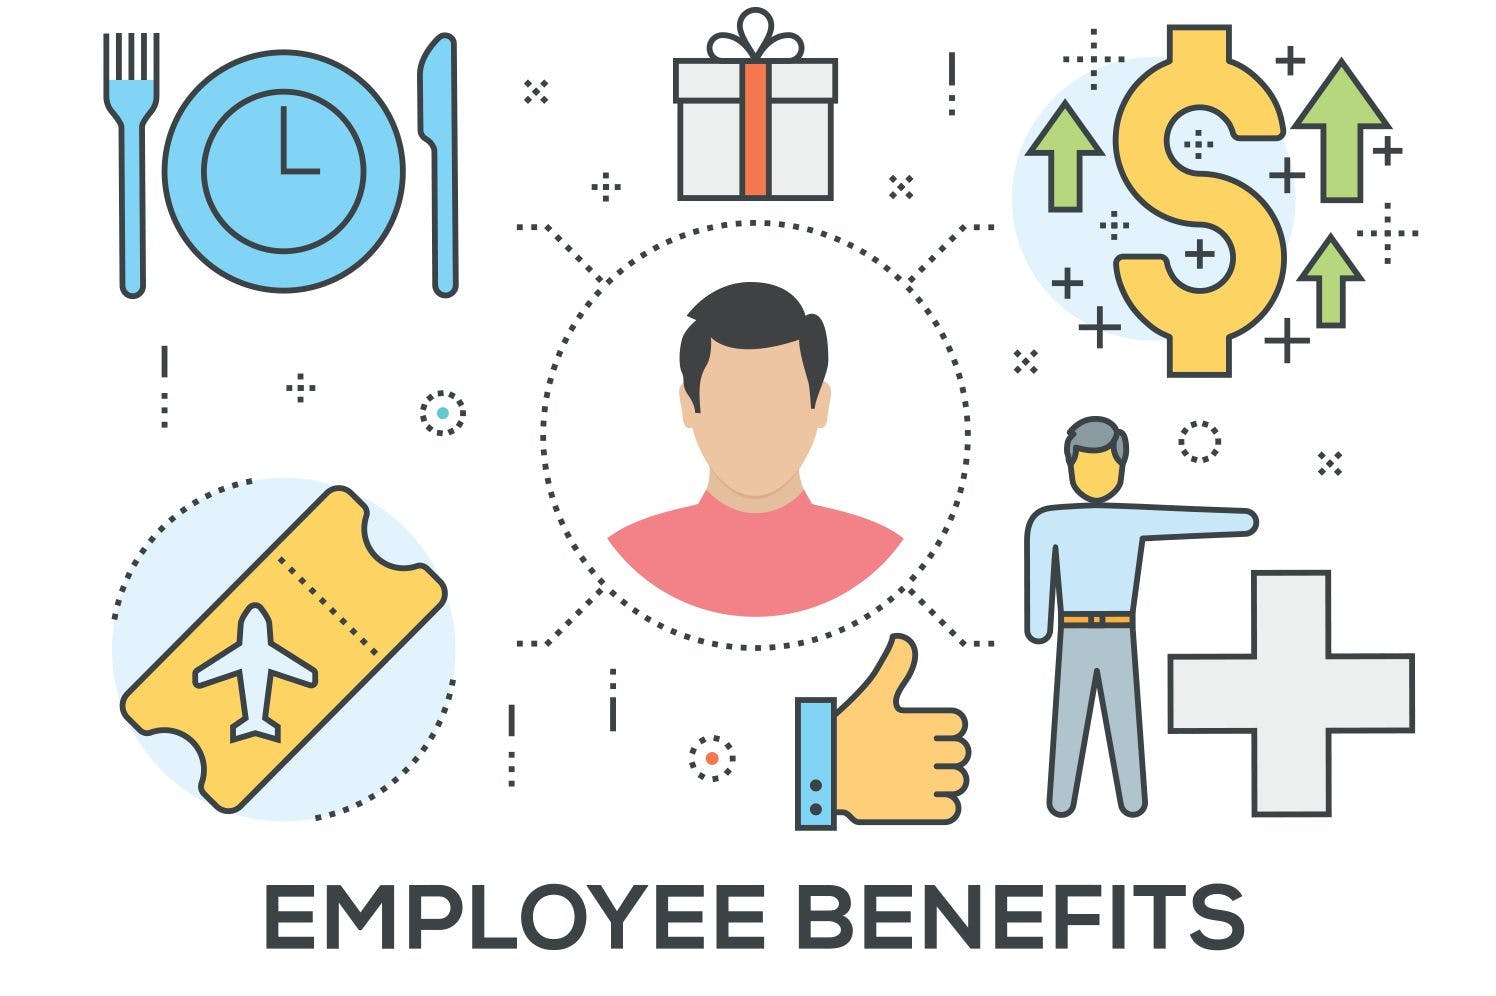 Interview With Todd Of Taylor Benefits: Changes Coming To The Employee Benefits Space?